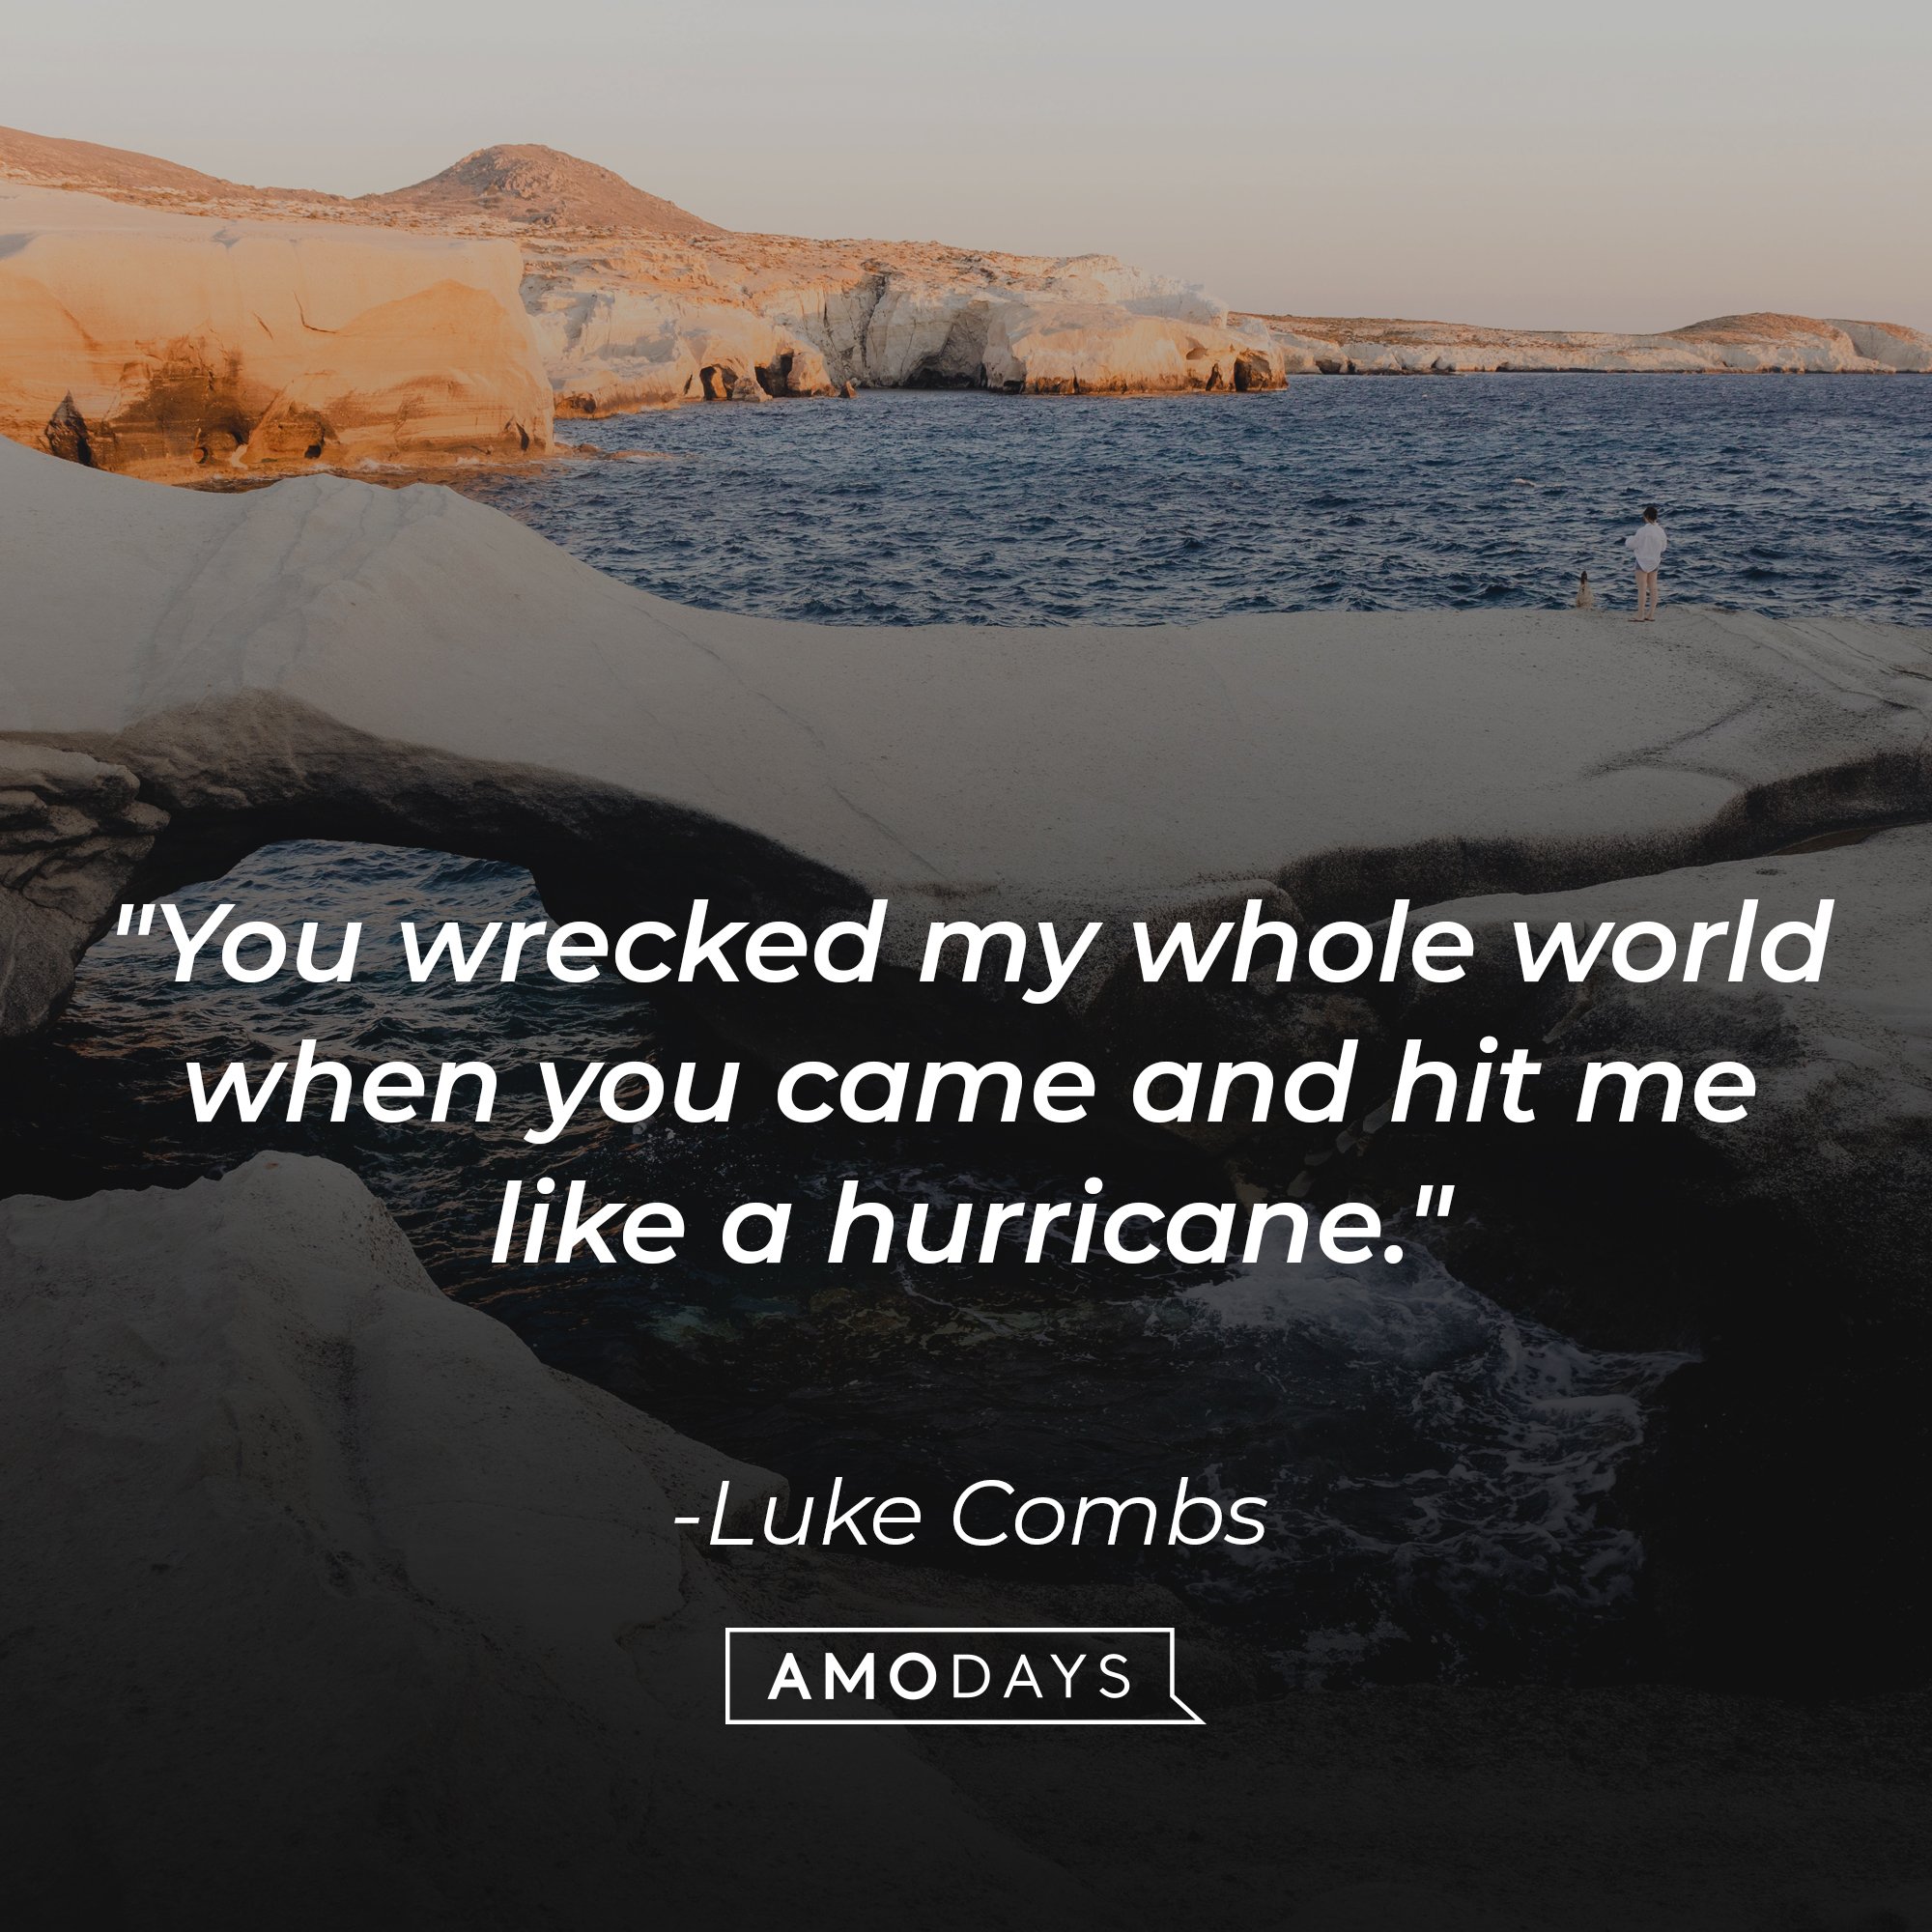 Luke Combs's quote, "You wrecked my whole world when you came and hit me like a hurricane." Source: Unsplash.com